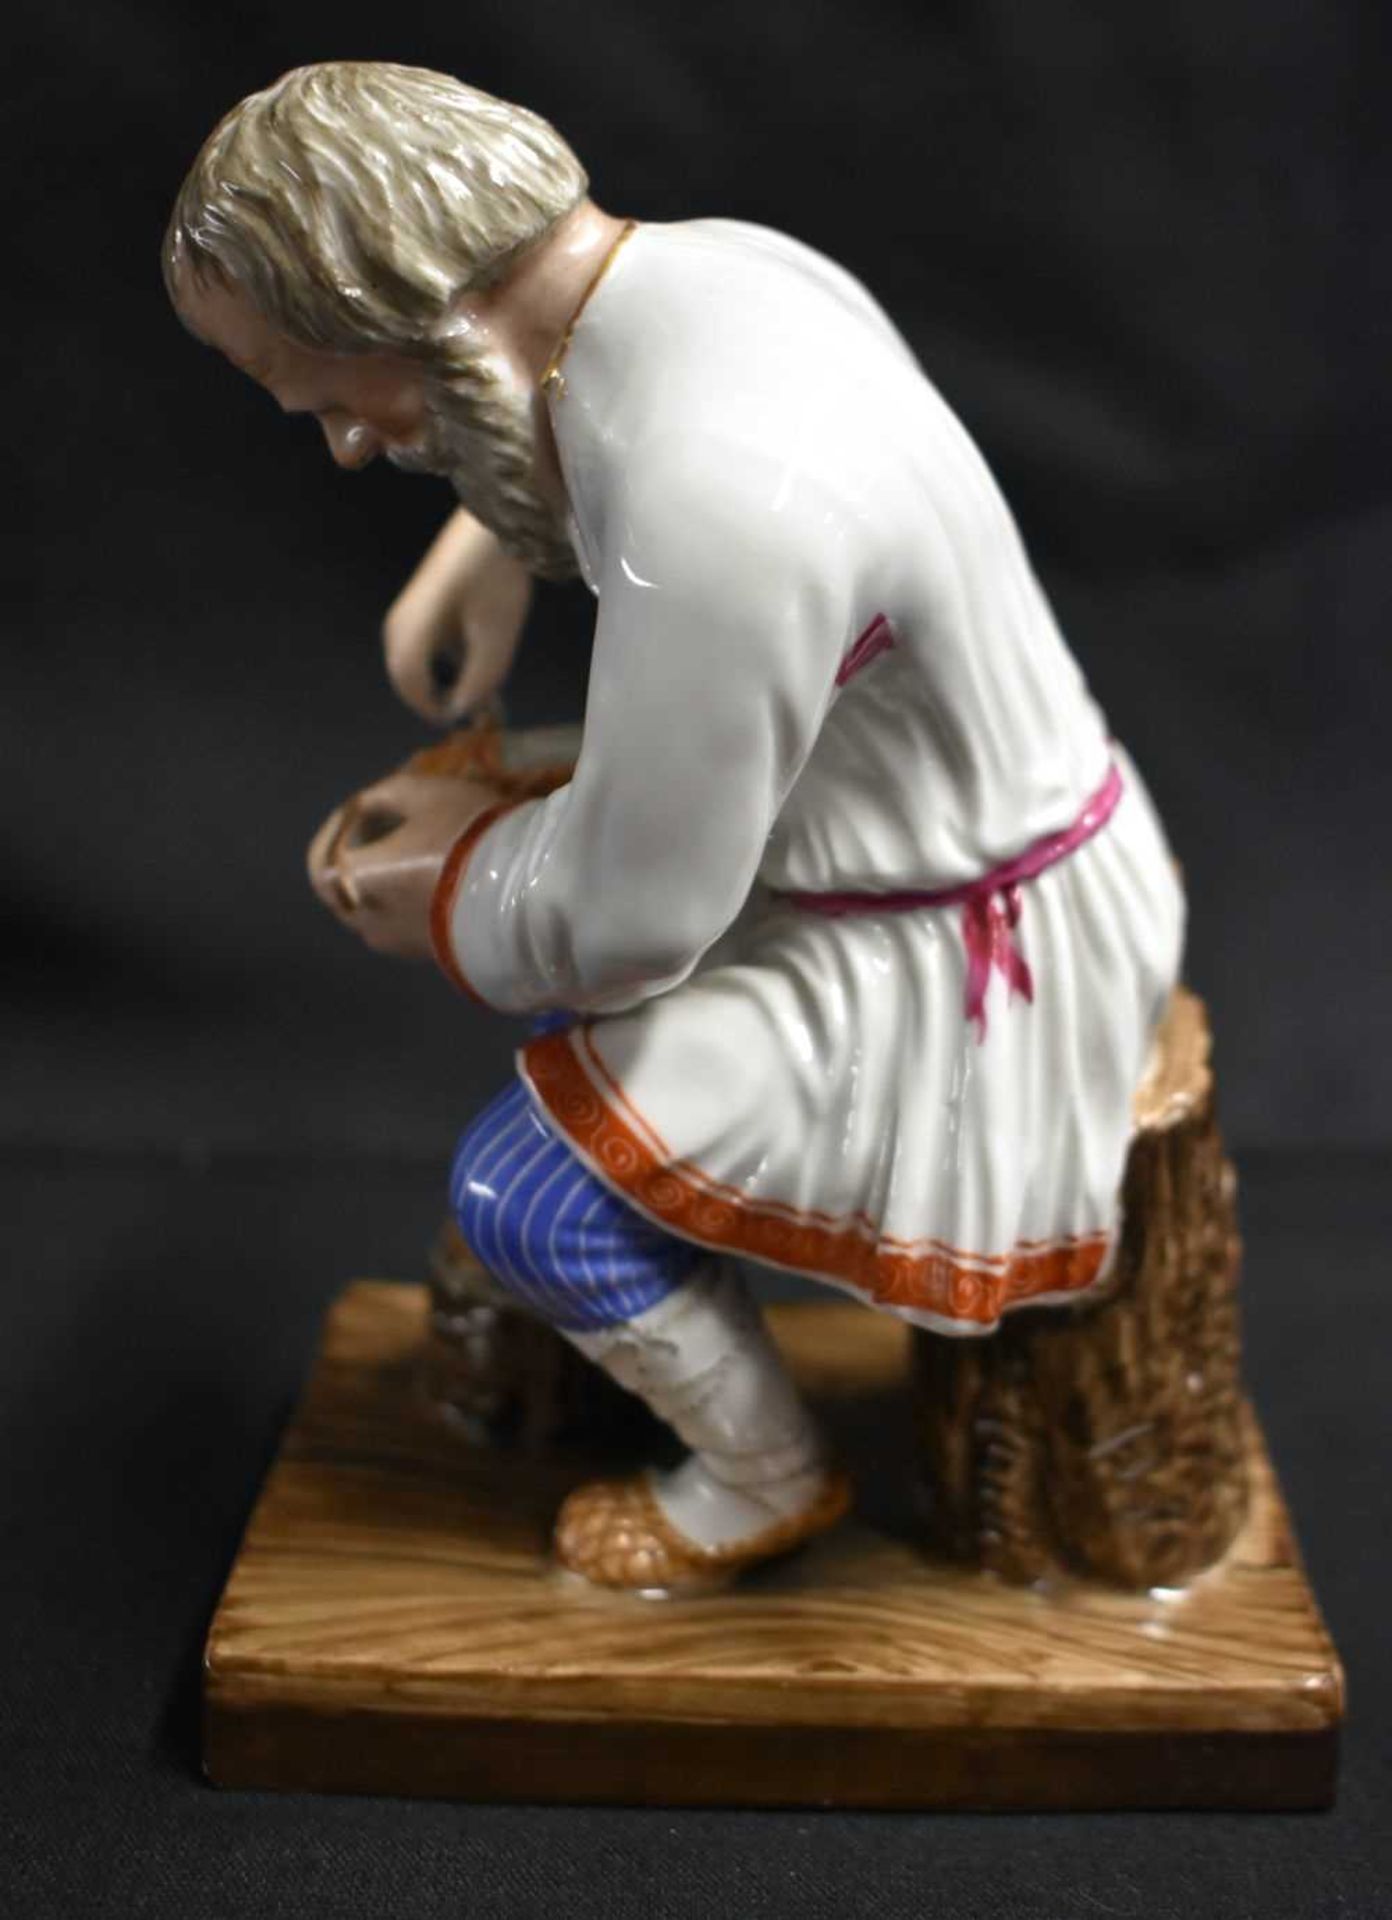 A LATE 19TH CENTURY RUSSIA ST PETERSBURG PORCELAIN FIGURE OF A COBBLER modelled repairing a shoe. 14 - Image 6 of 7